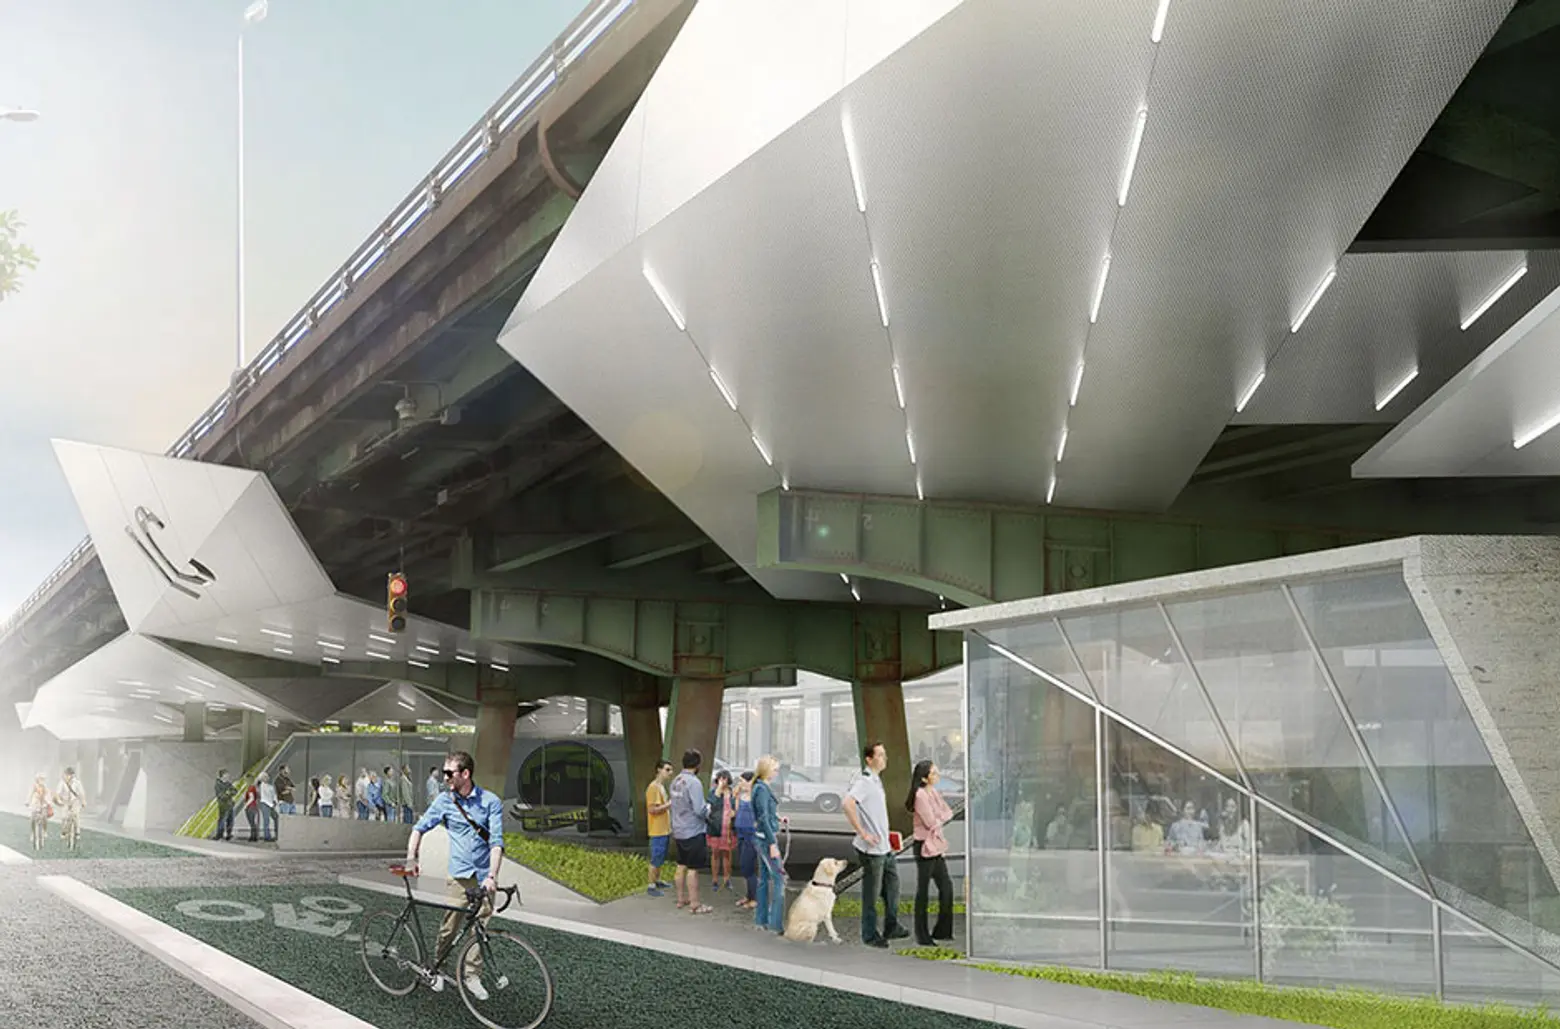 Design Firm Reimagines Neglected Space Under the BQE as a Food Court and Sports Center